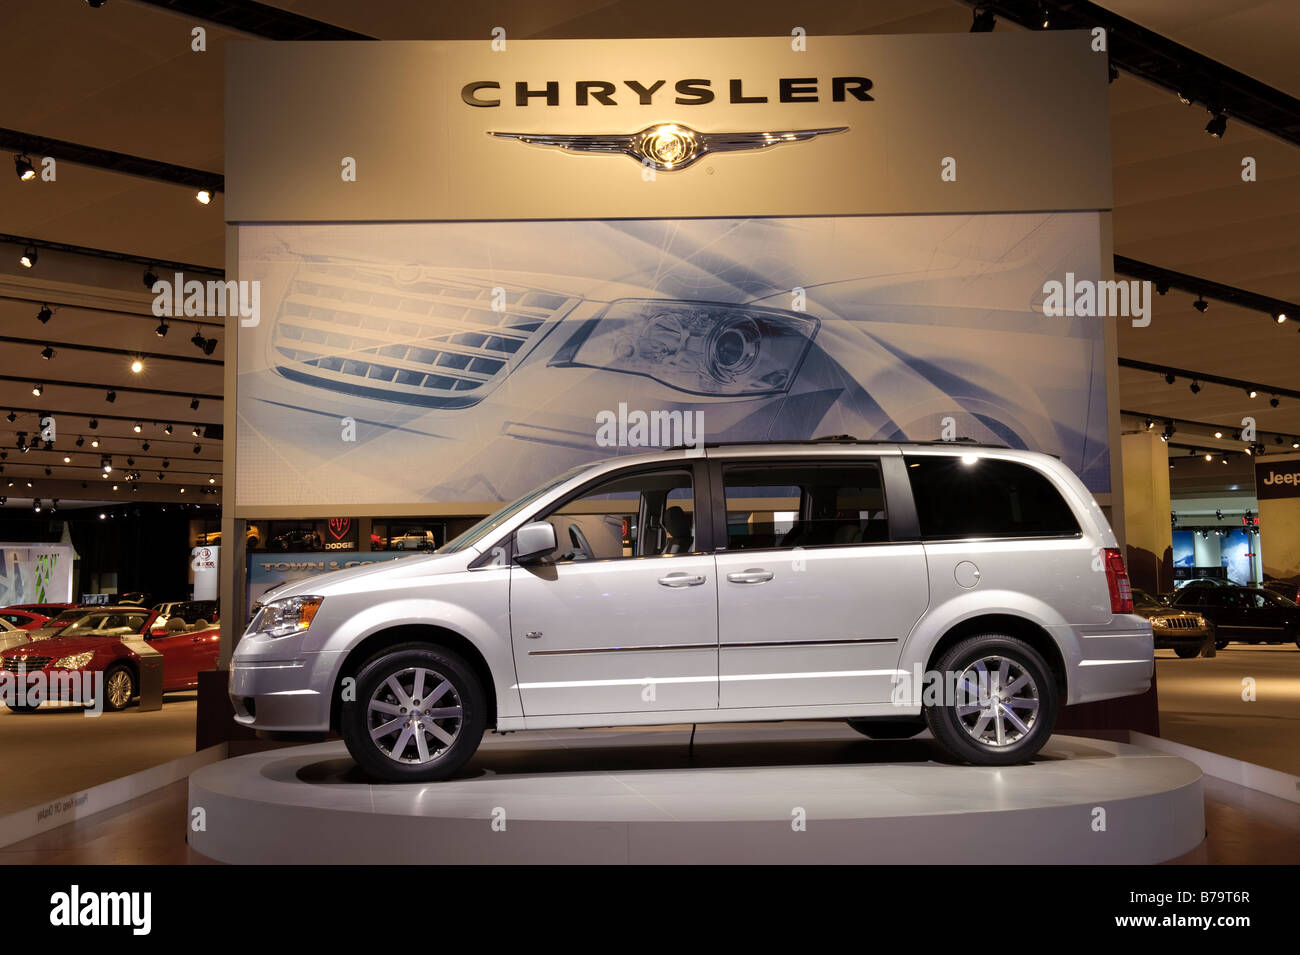 2009 Chrysler Town and Country minivan at the North American International Auto Show in Detroit Michigan 2009 Stock Photo